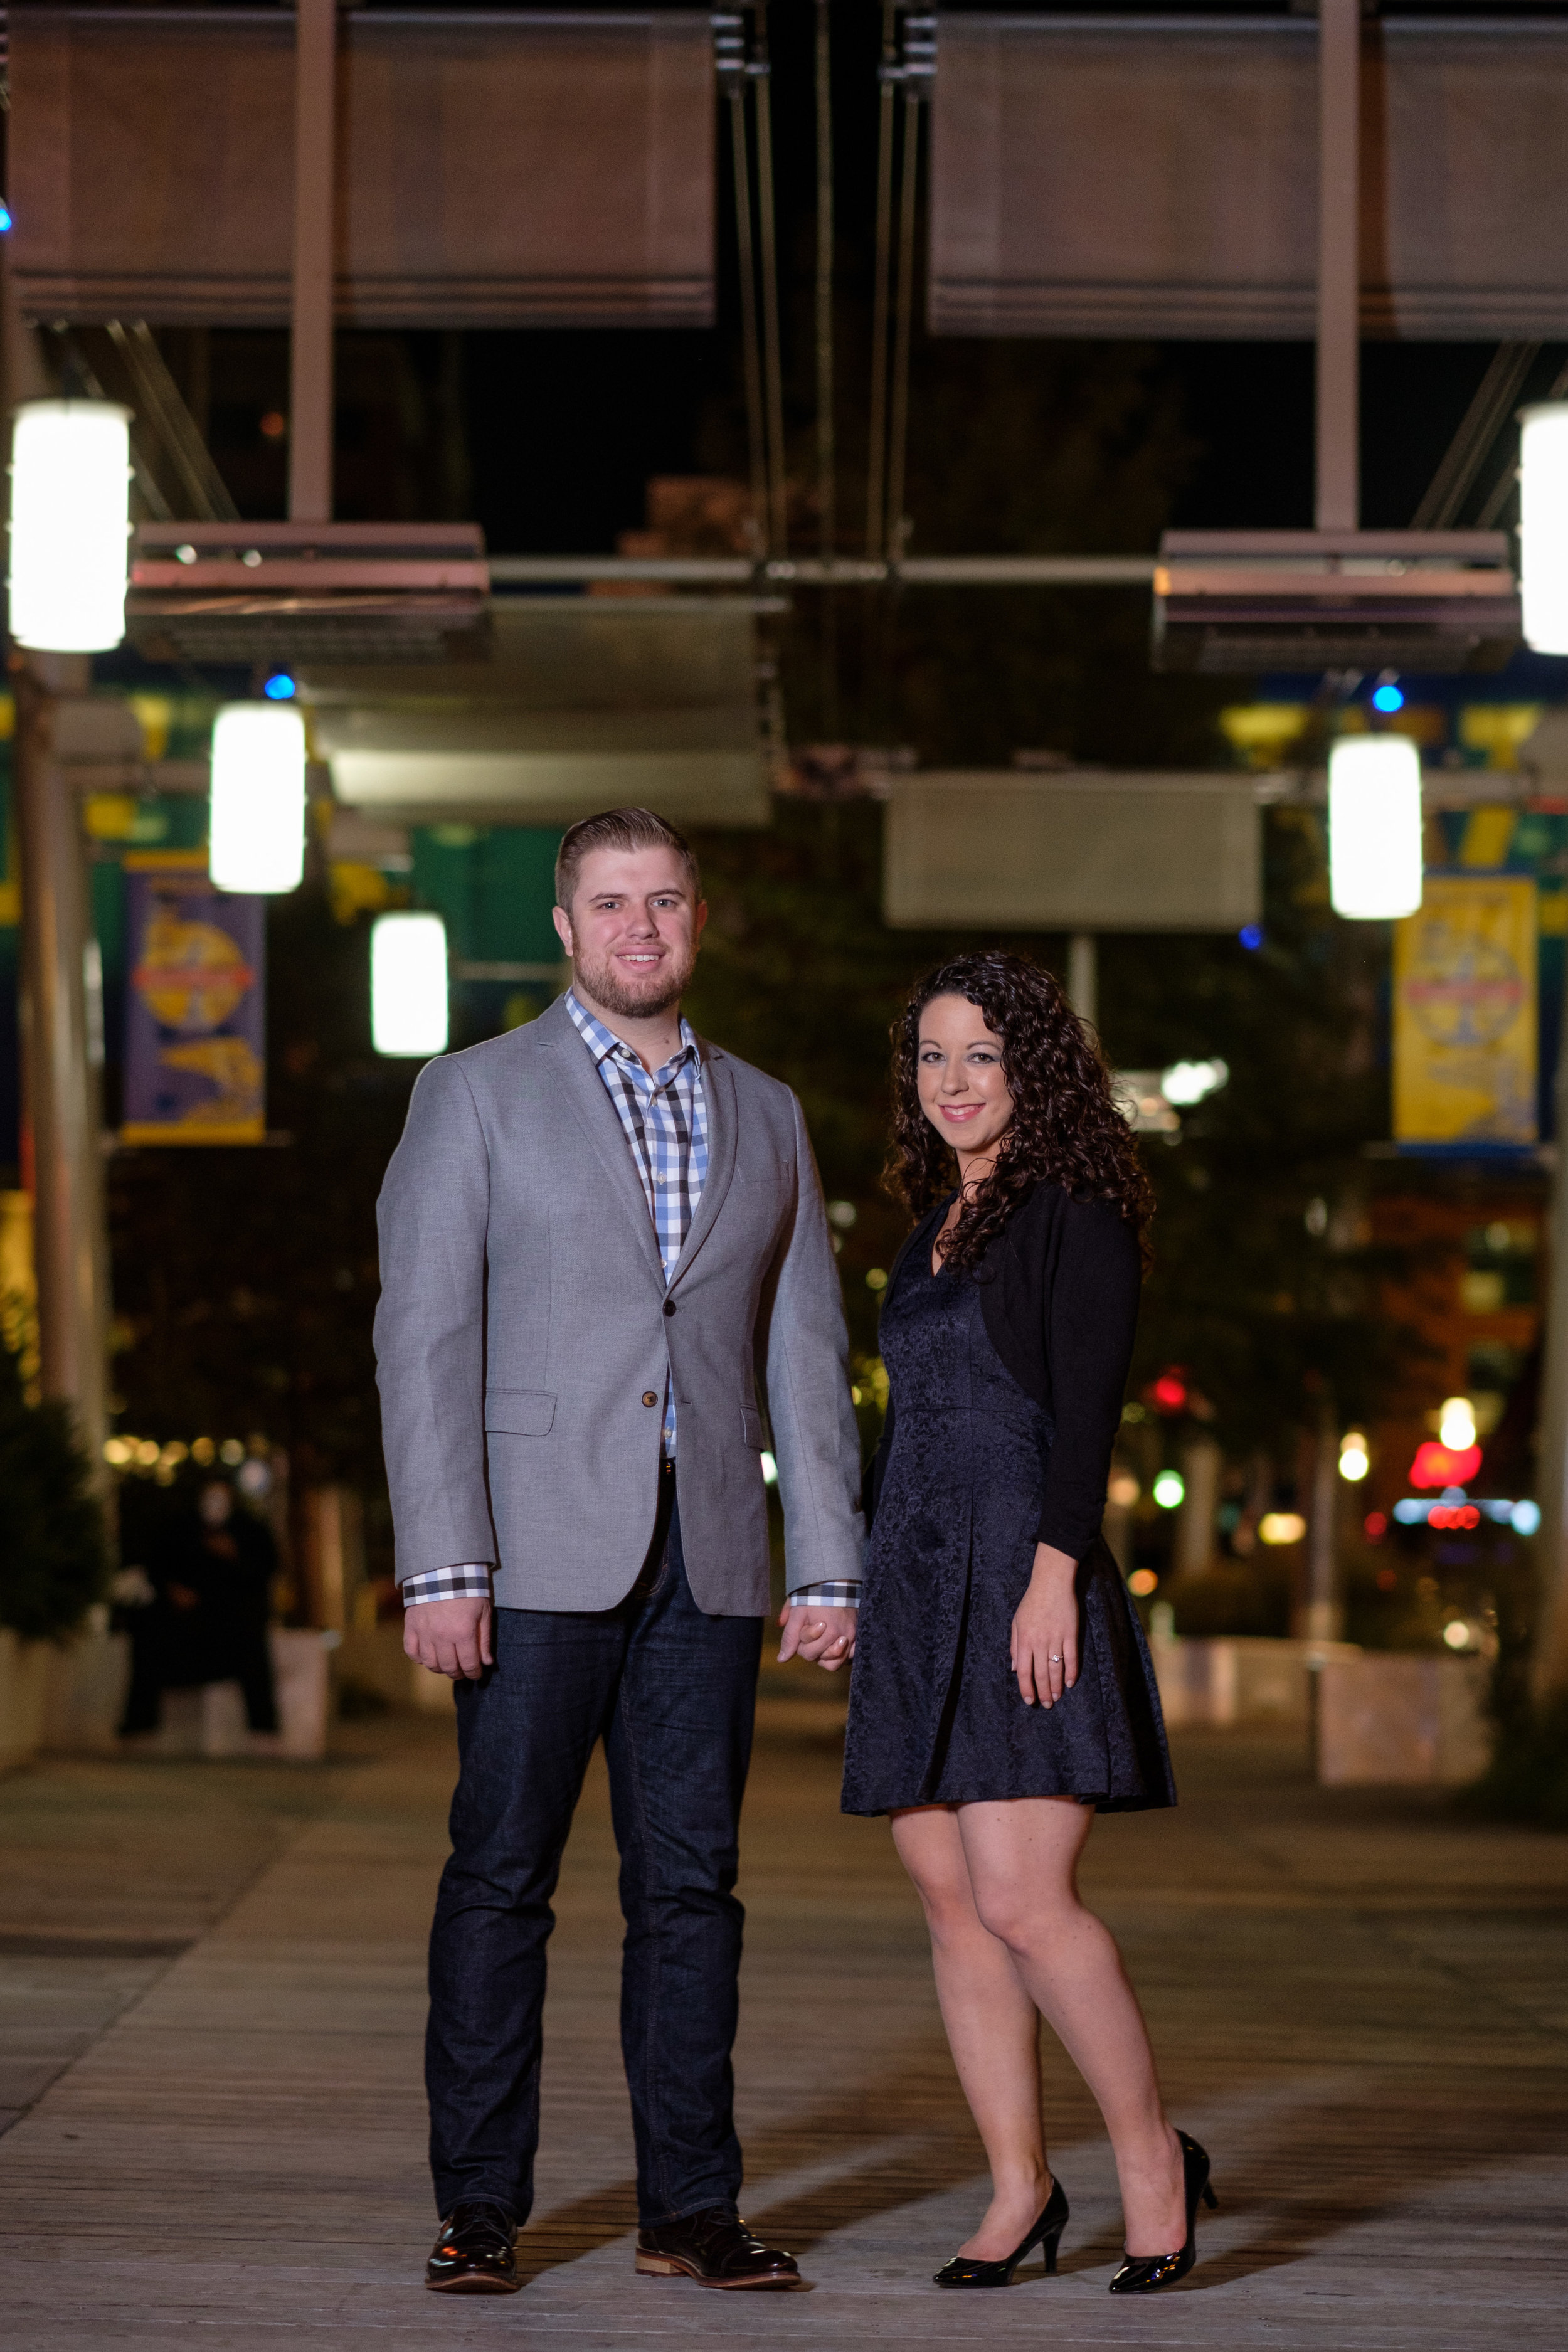 Downtown-Indianapolis-night-engagement-pictures-16.jpg